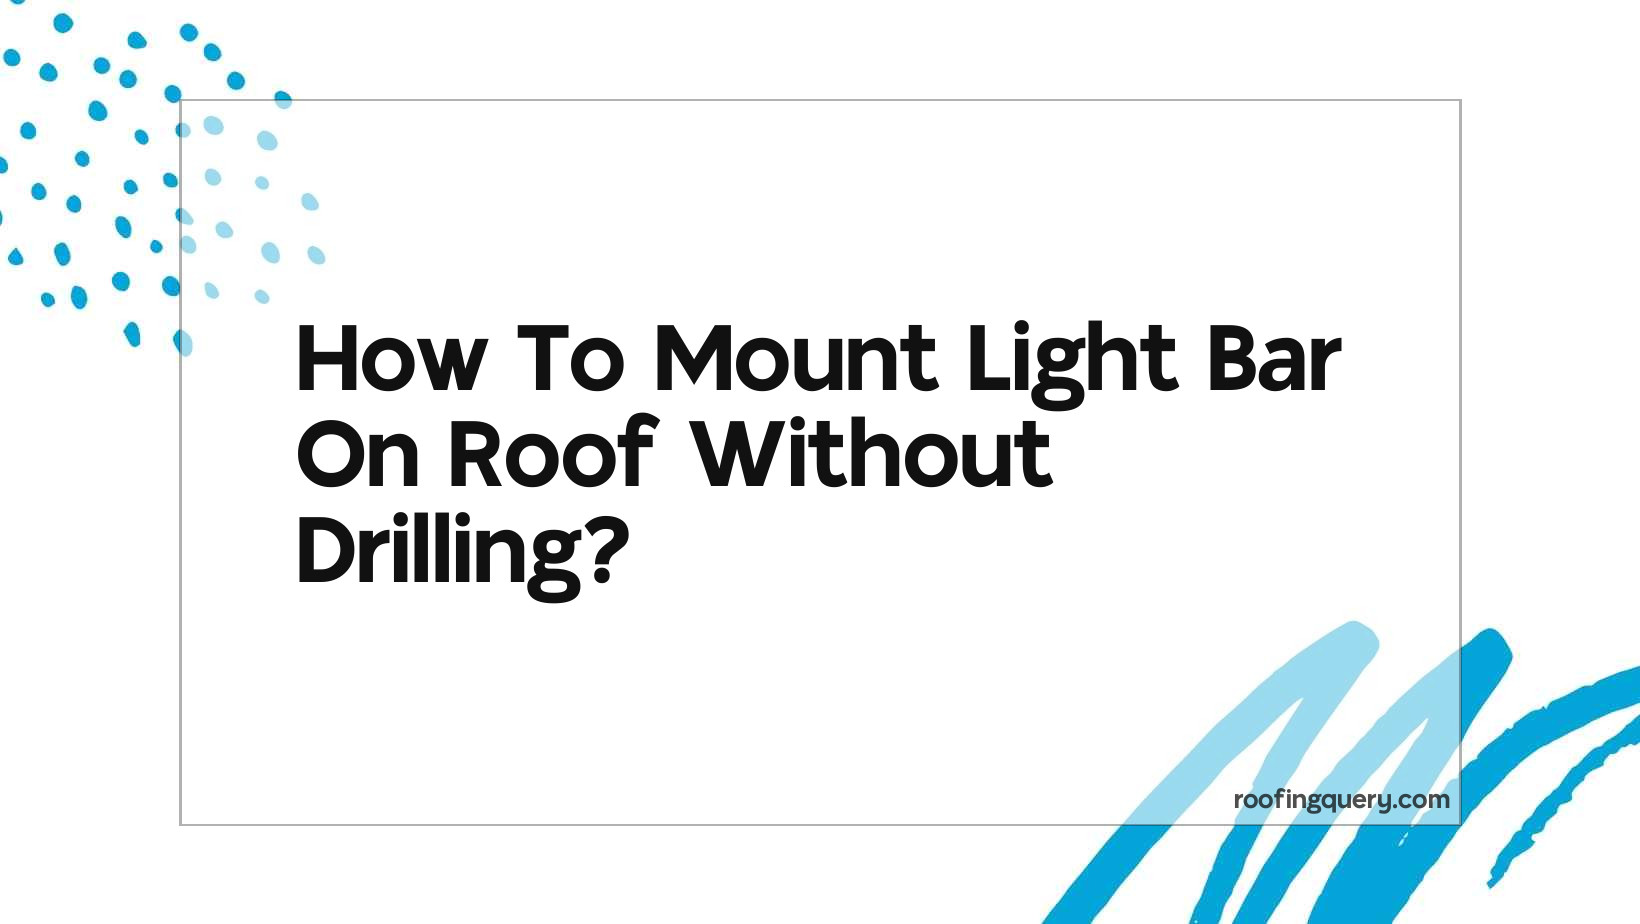 How To Mount Light Bar On Roof Without Drilling?